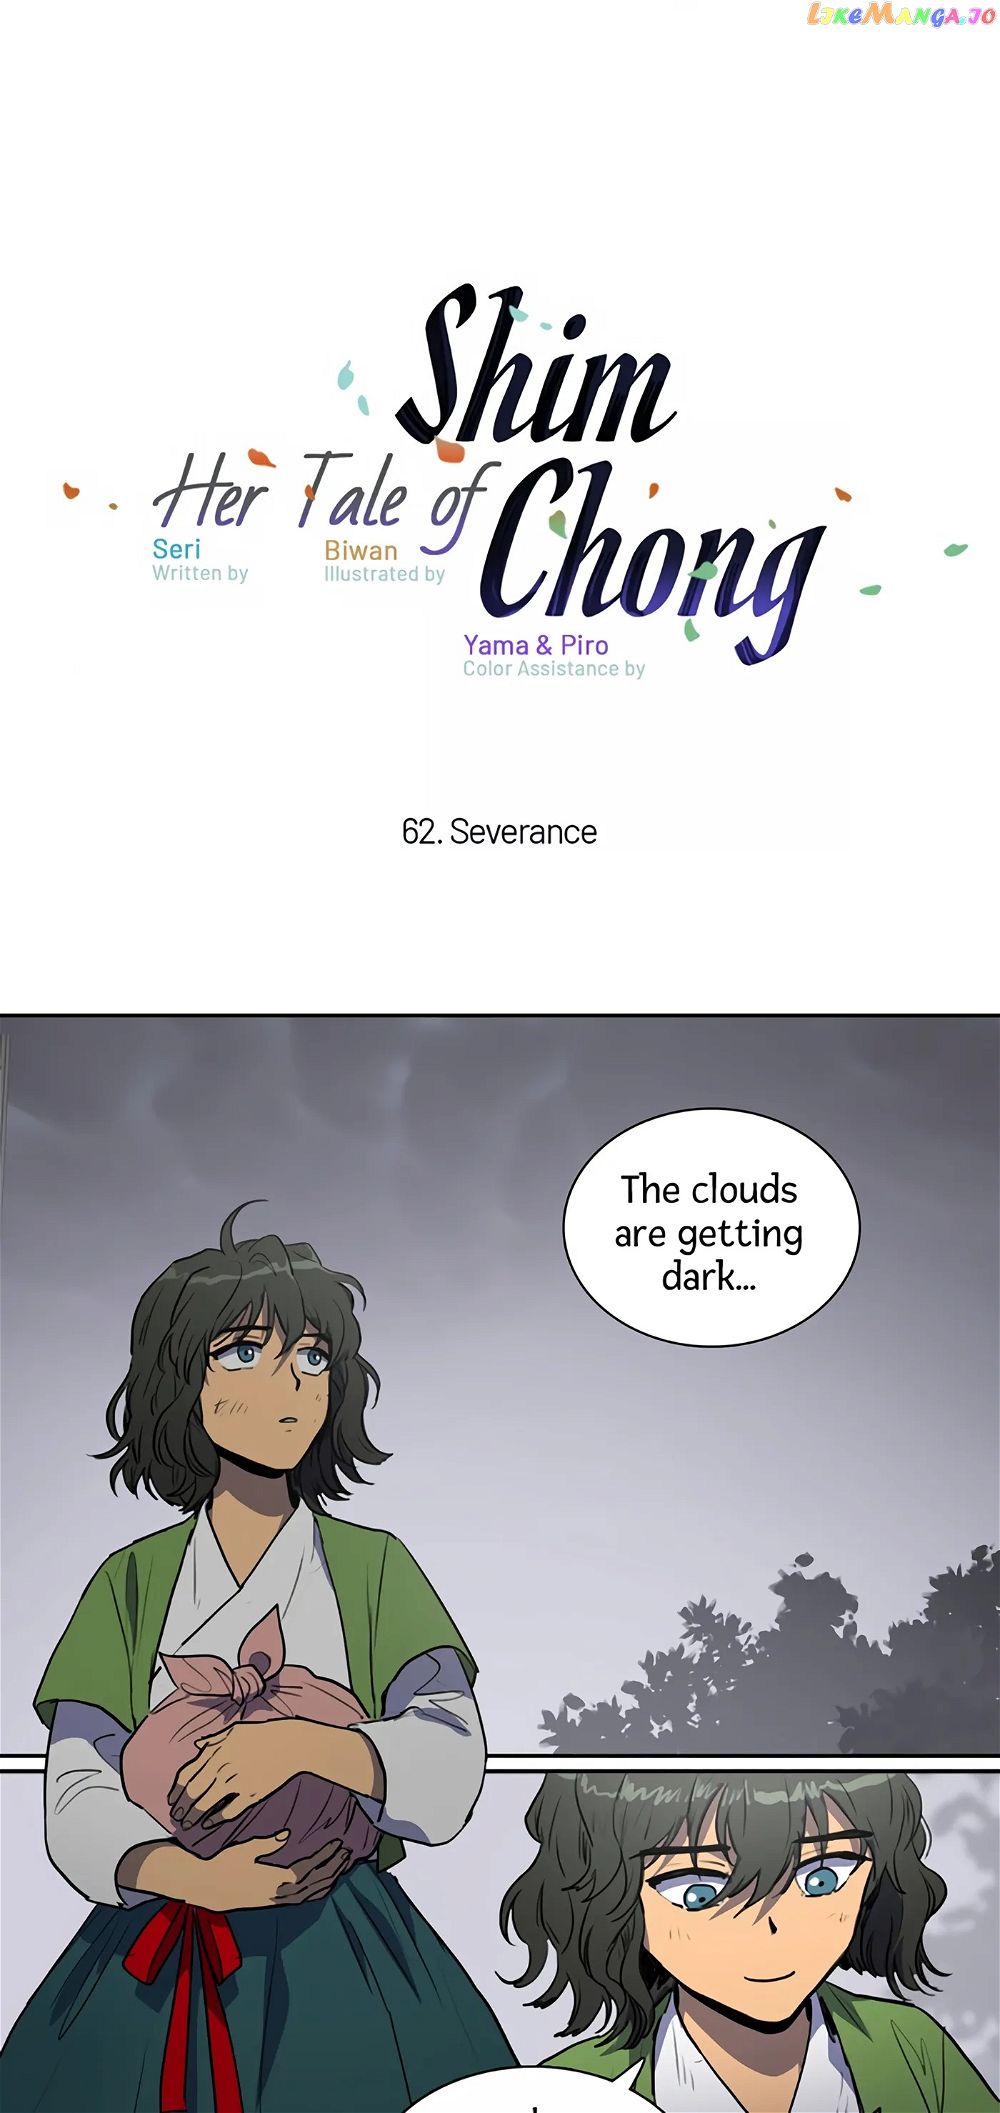 Her Tale of Shim Chong Chapter 62 - Page 1